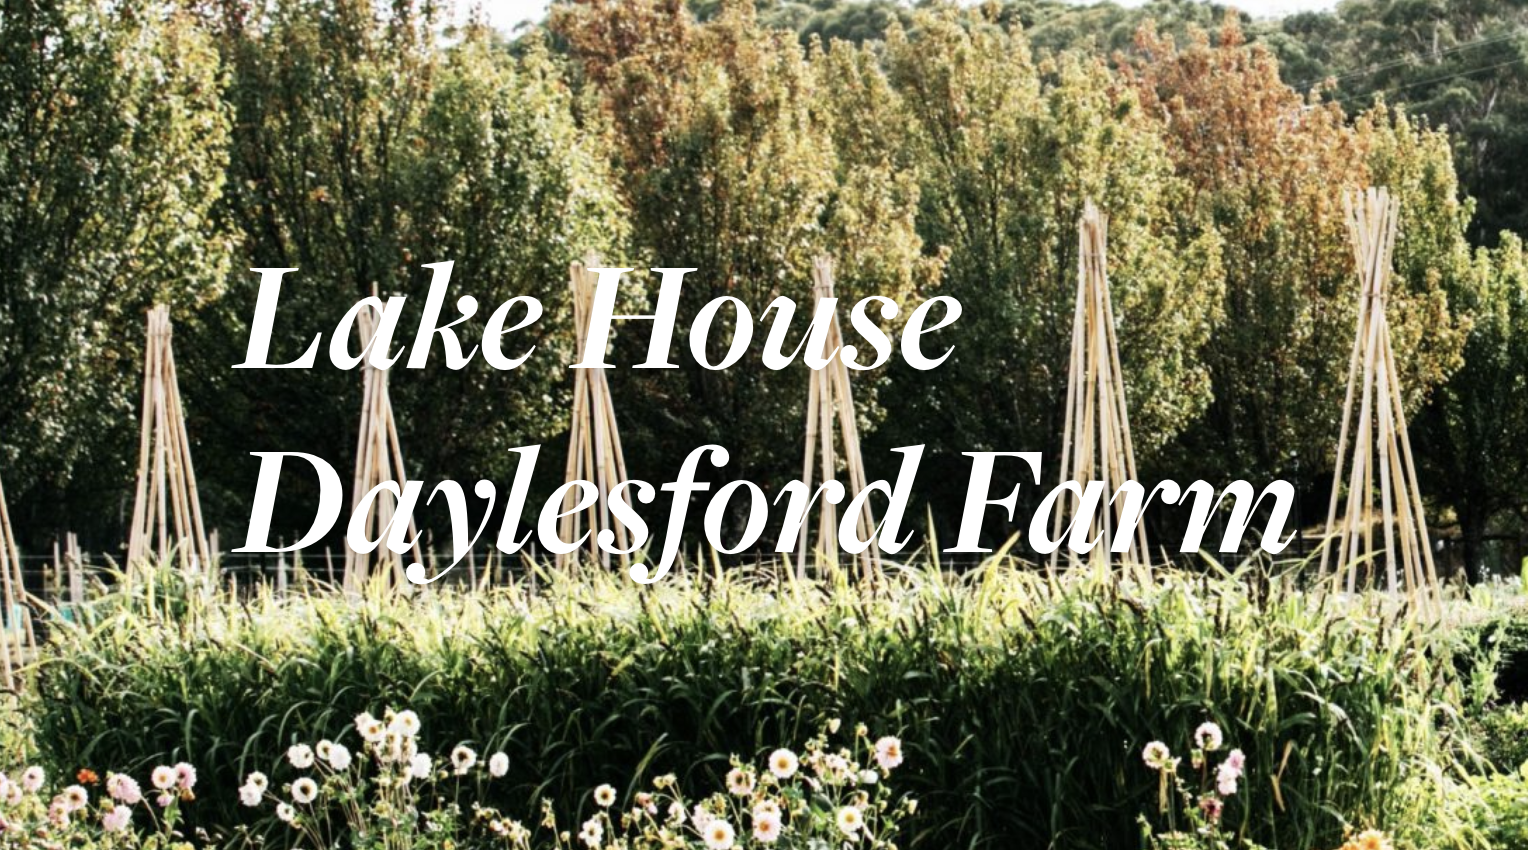 Lakehouse Daylesford - Stay and Dine